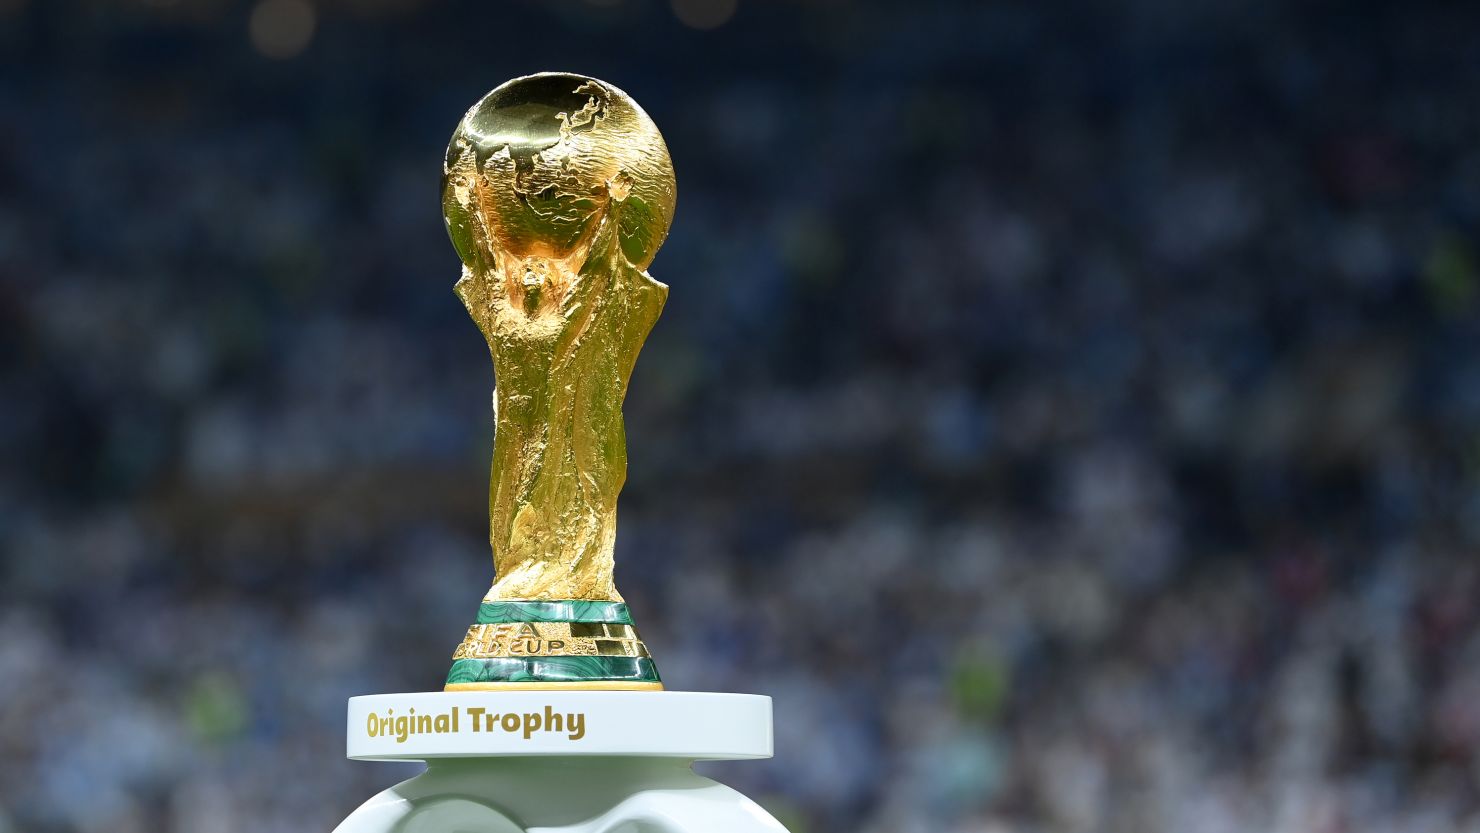 Opening match of 2030 World Cup to be played in Spain, Portugal or